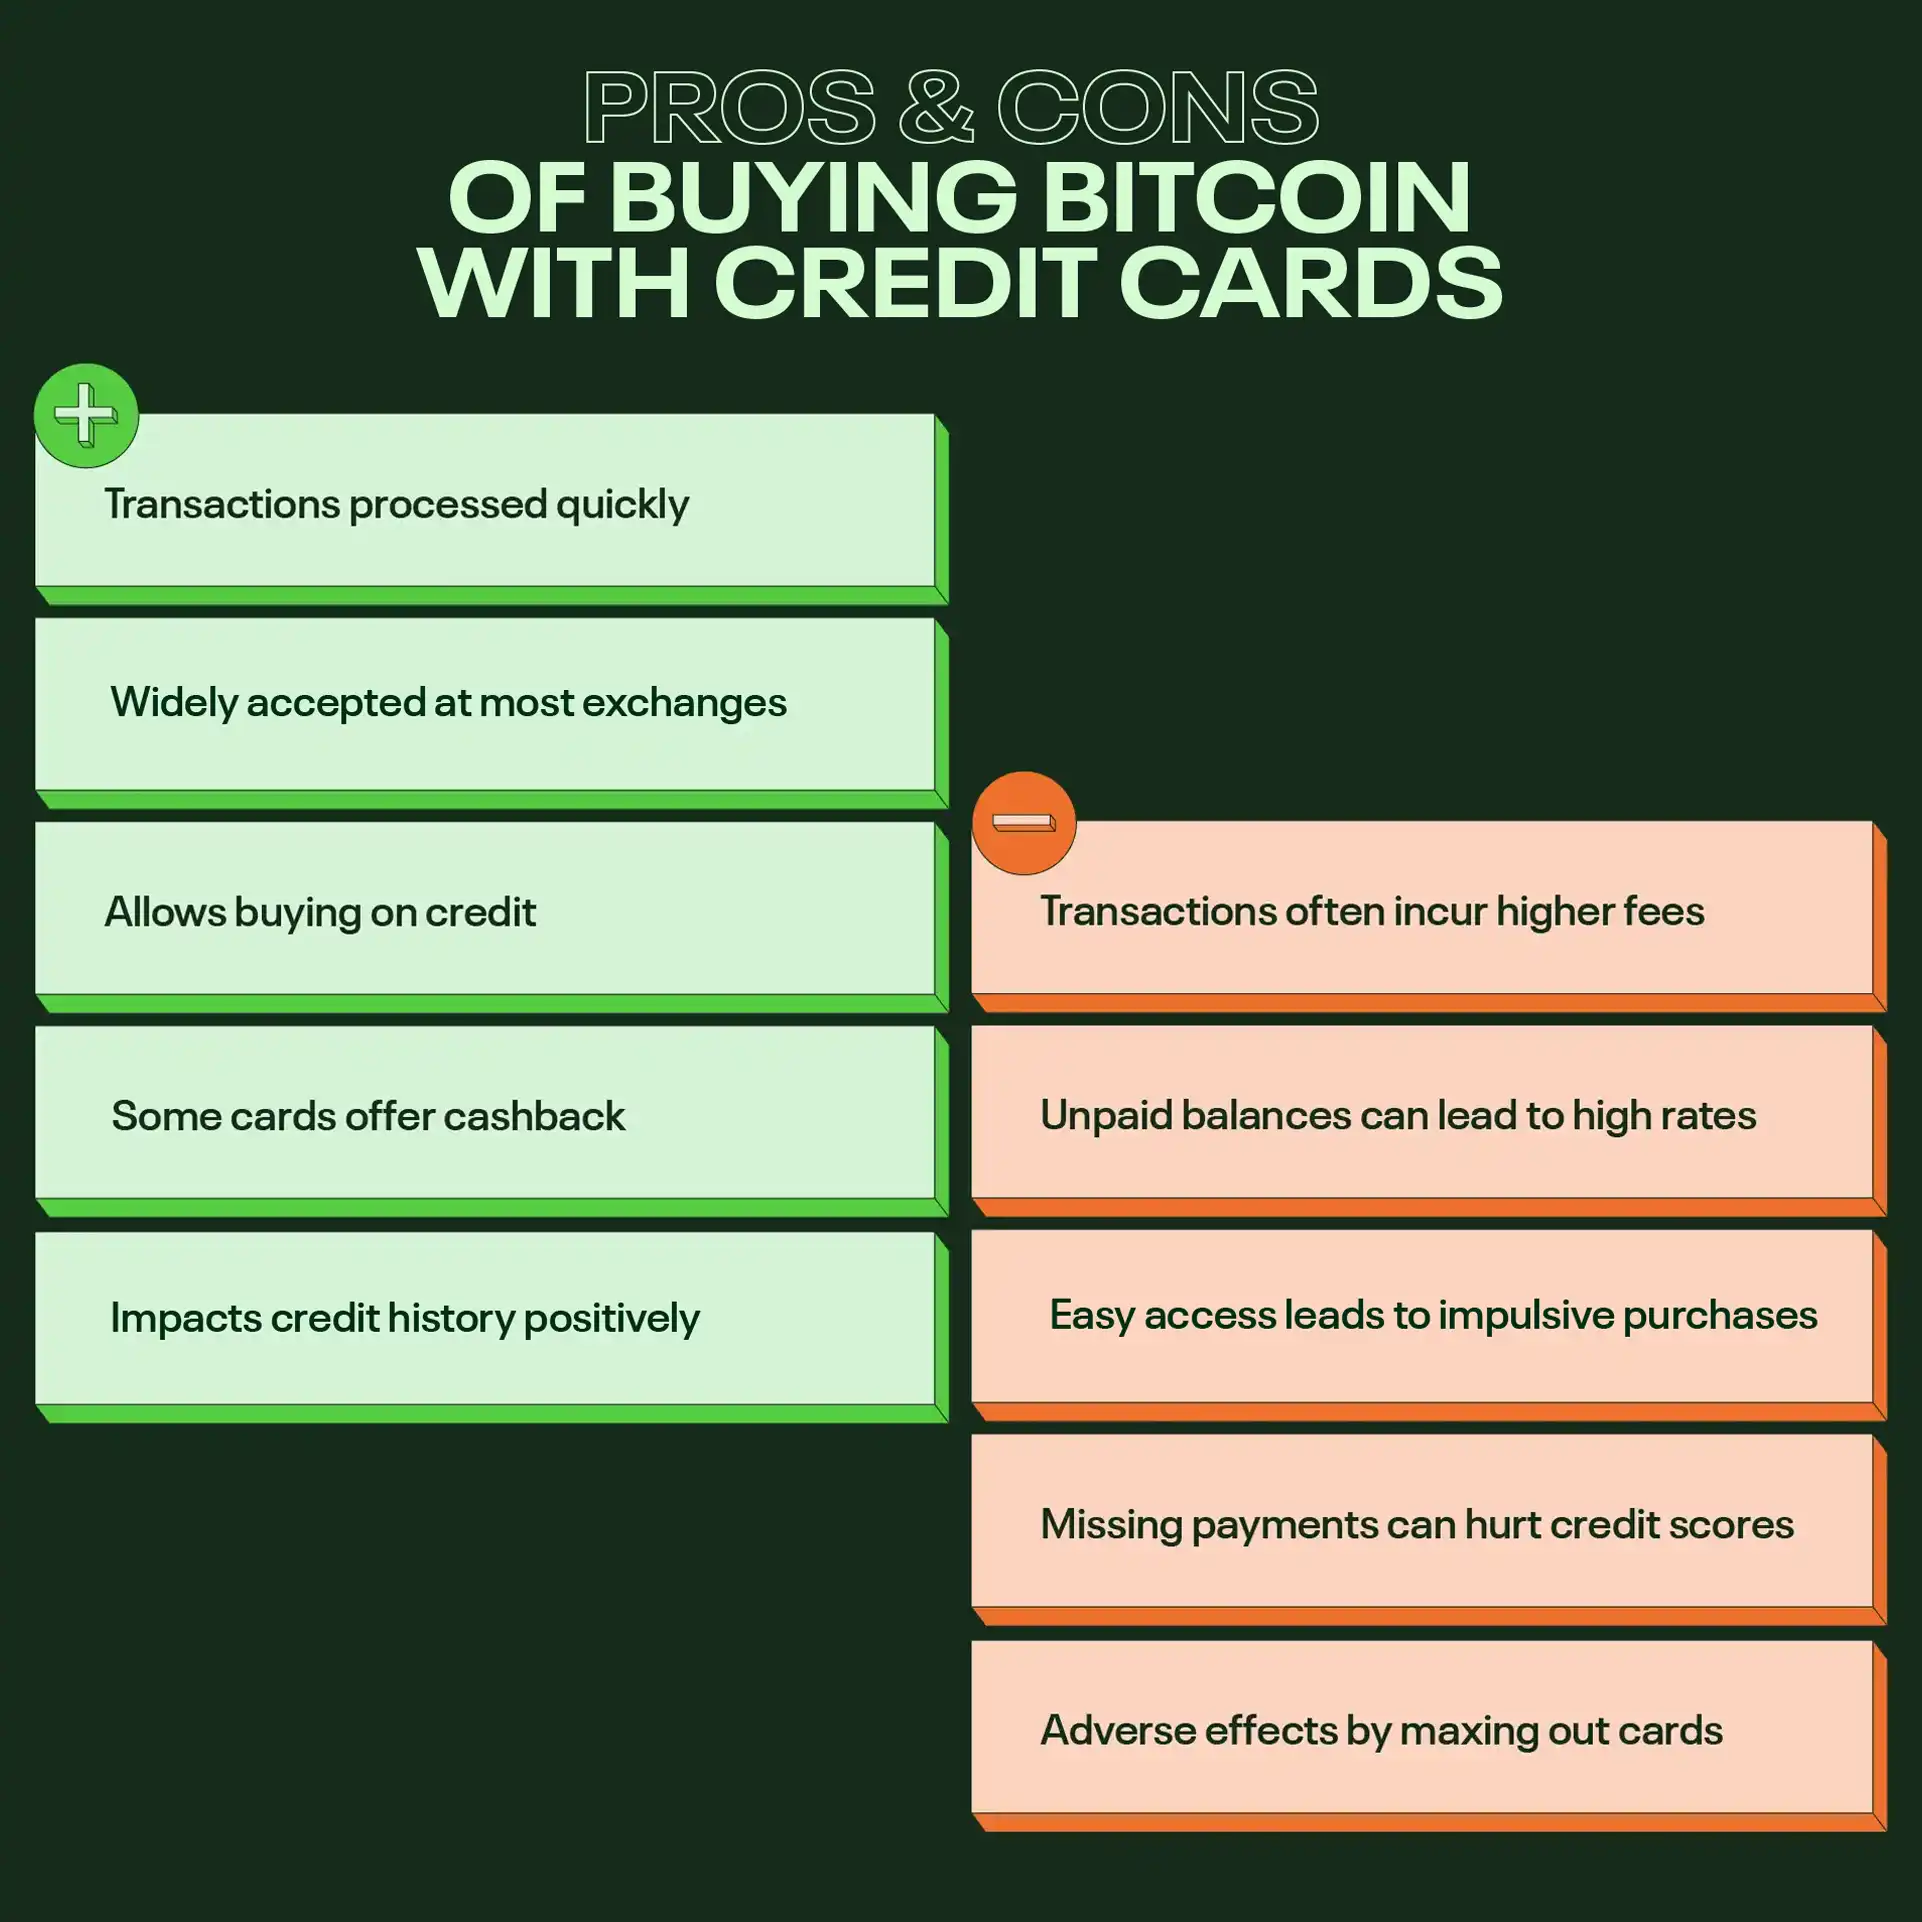 Pros & cons of buying BTC with credit cards